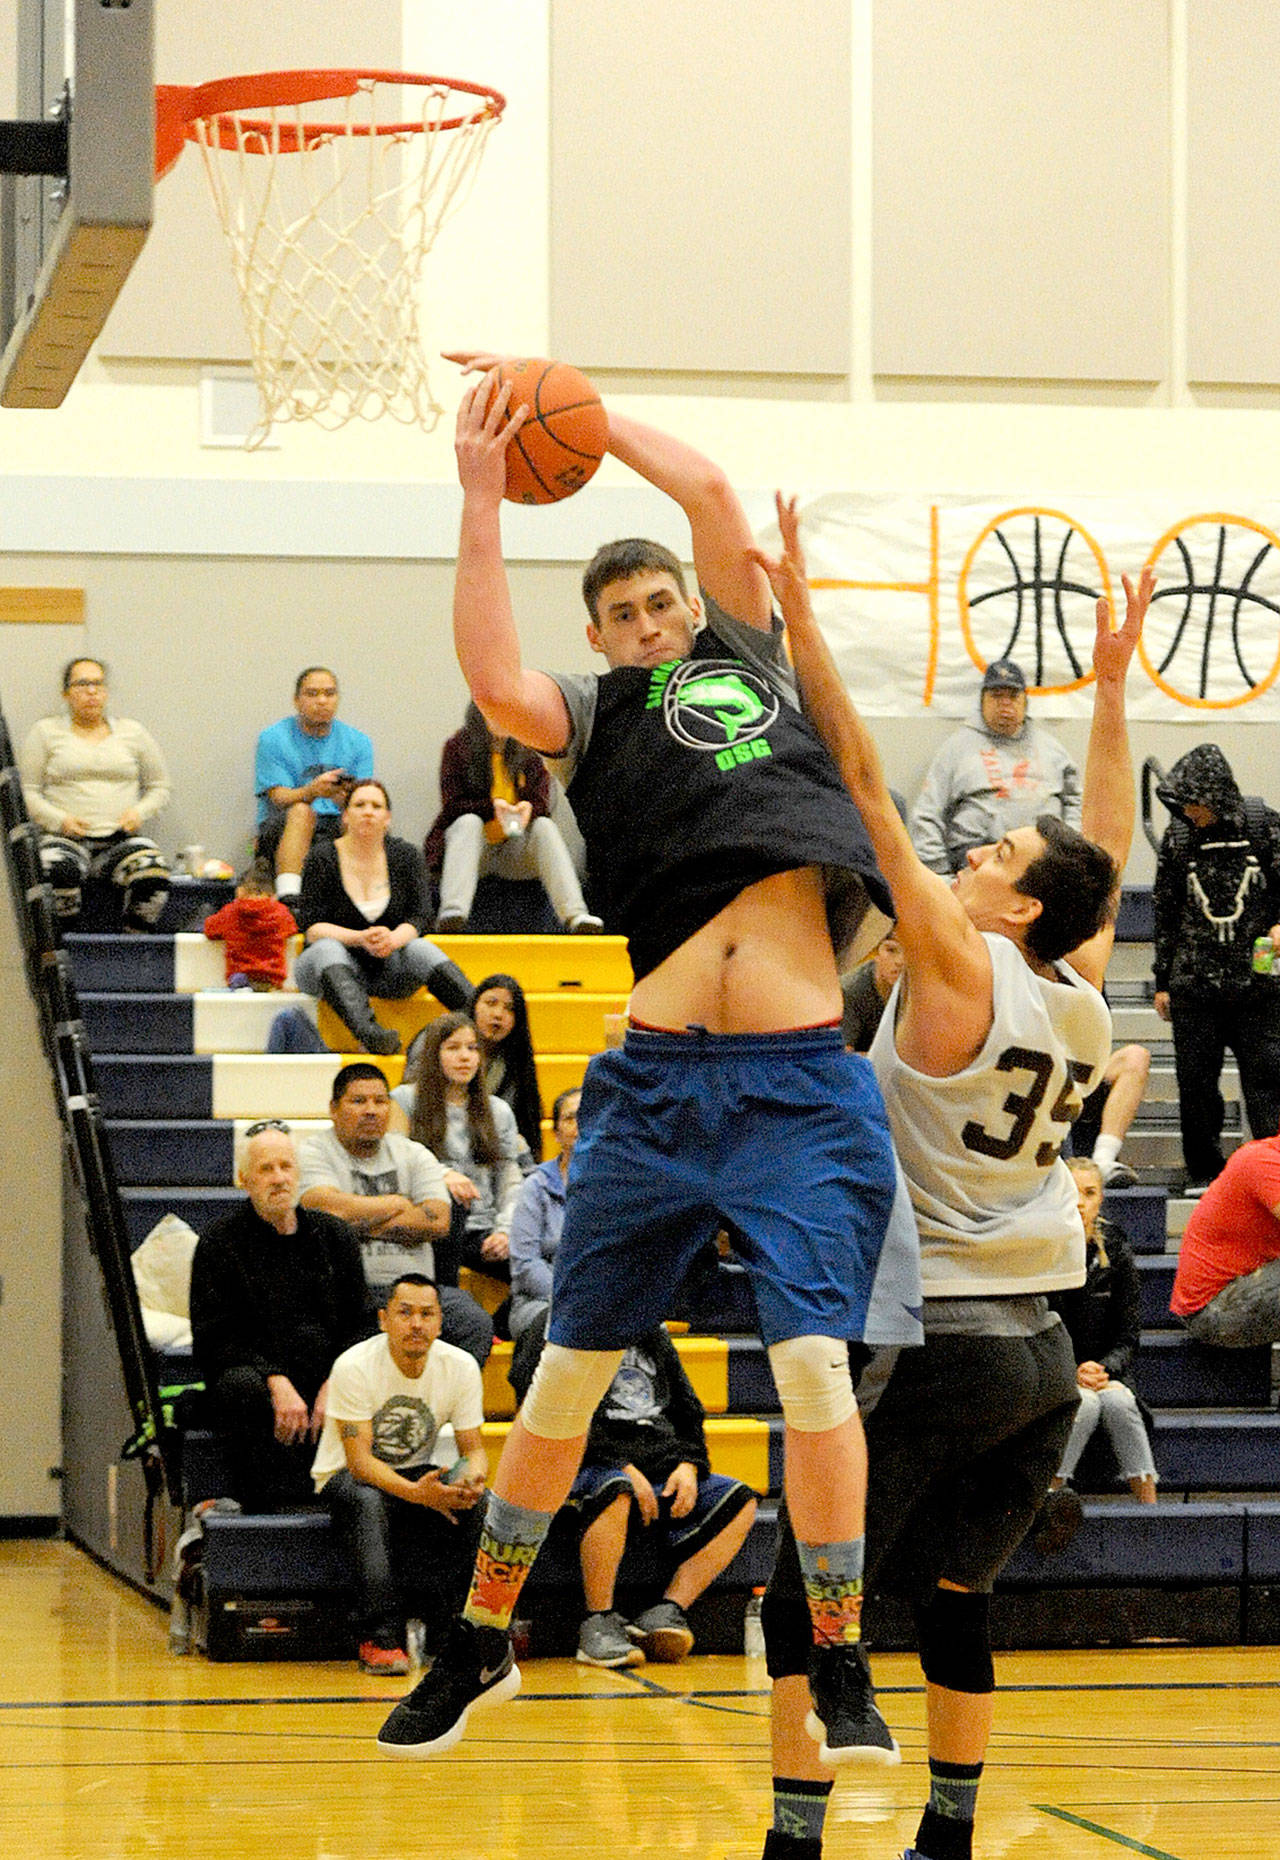 Lonnie Archibald/for Peninsula Daily News Marky Adams, who has played for Forks High School and Peninsula College and currently plays for St. Martin’s University, grabs a rebound for Olympic Sporting Goods of Forks over Black Diamond Electric’s Cal Shell in the championship game of the Nate Crippen Memorial Tournament held in Forks over the weekend. OSG defeated Black Diamond Electric 69-61.